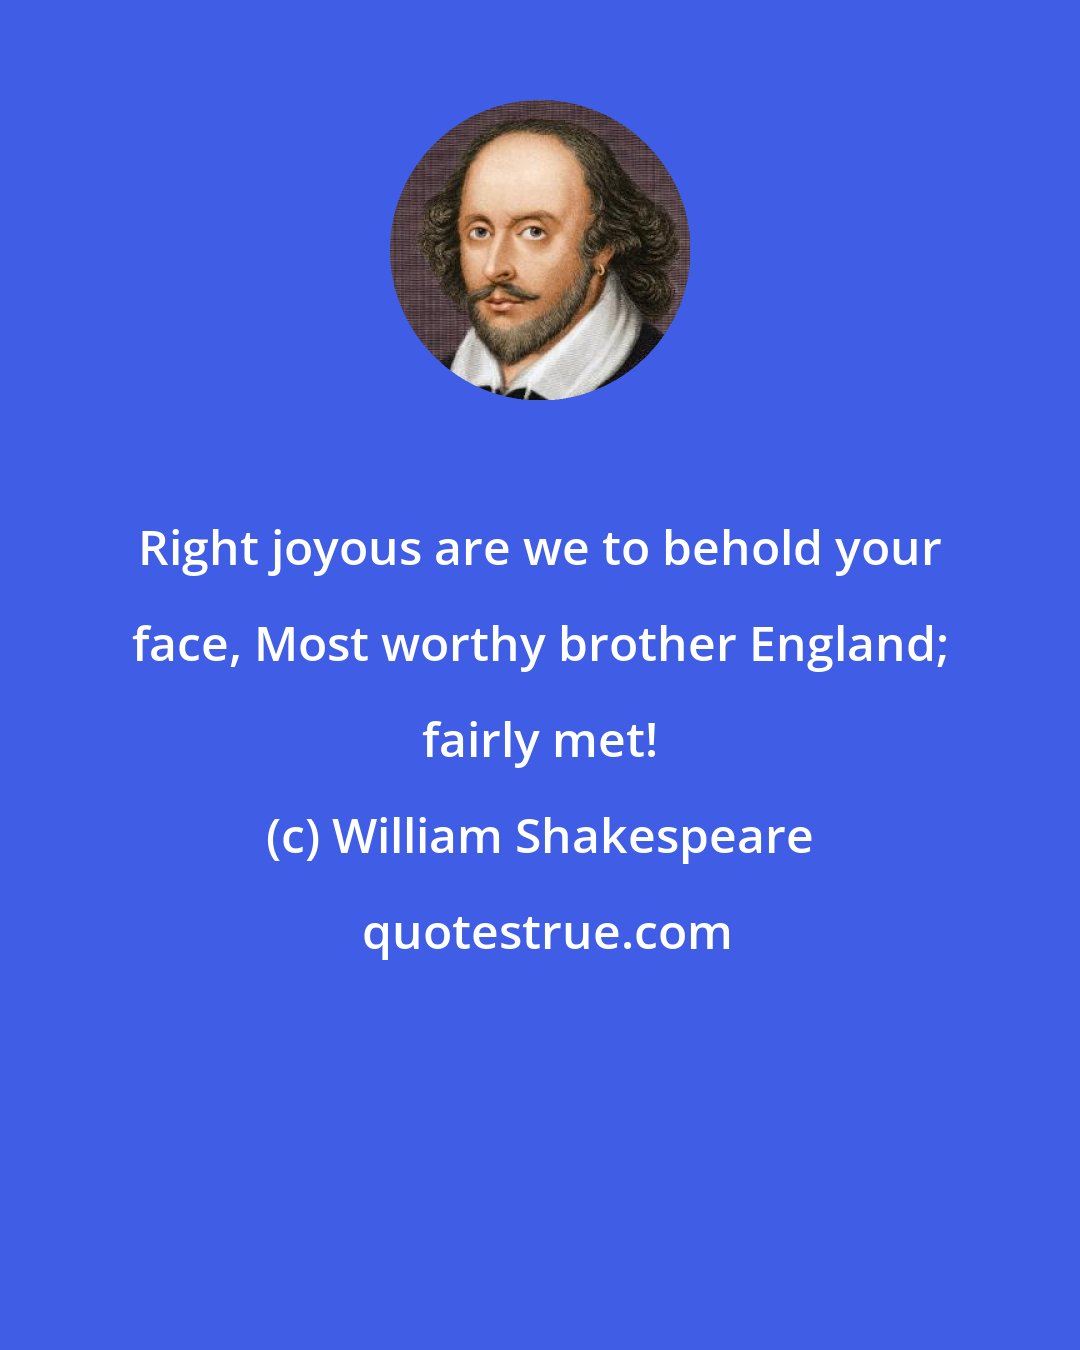 William Shakespeare: Right joyous are we to behold your face, Most worthy brother England; fairly met!